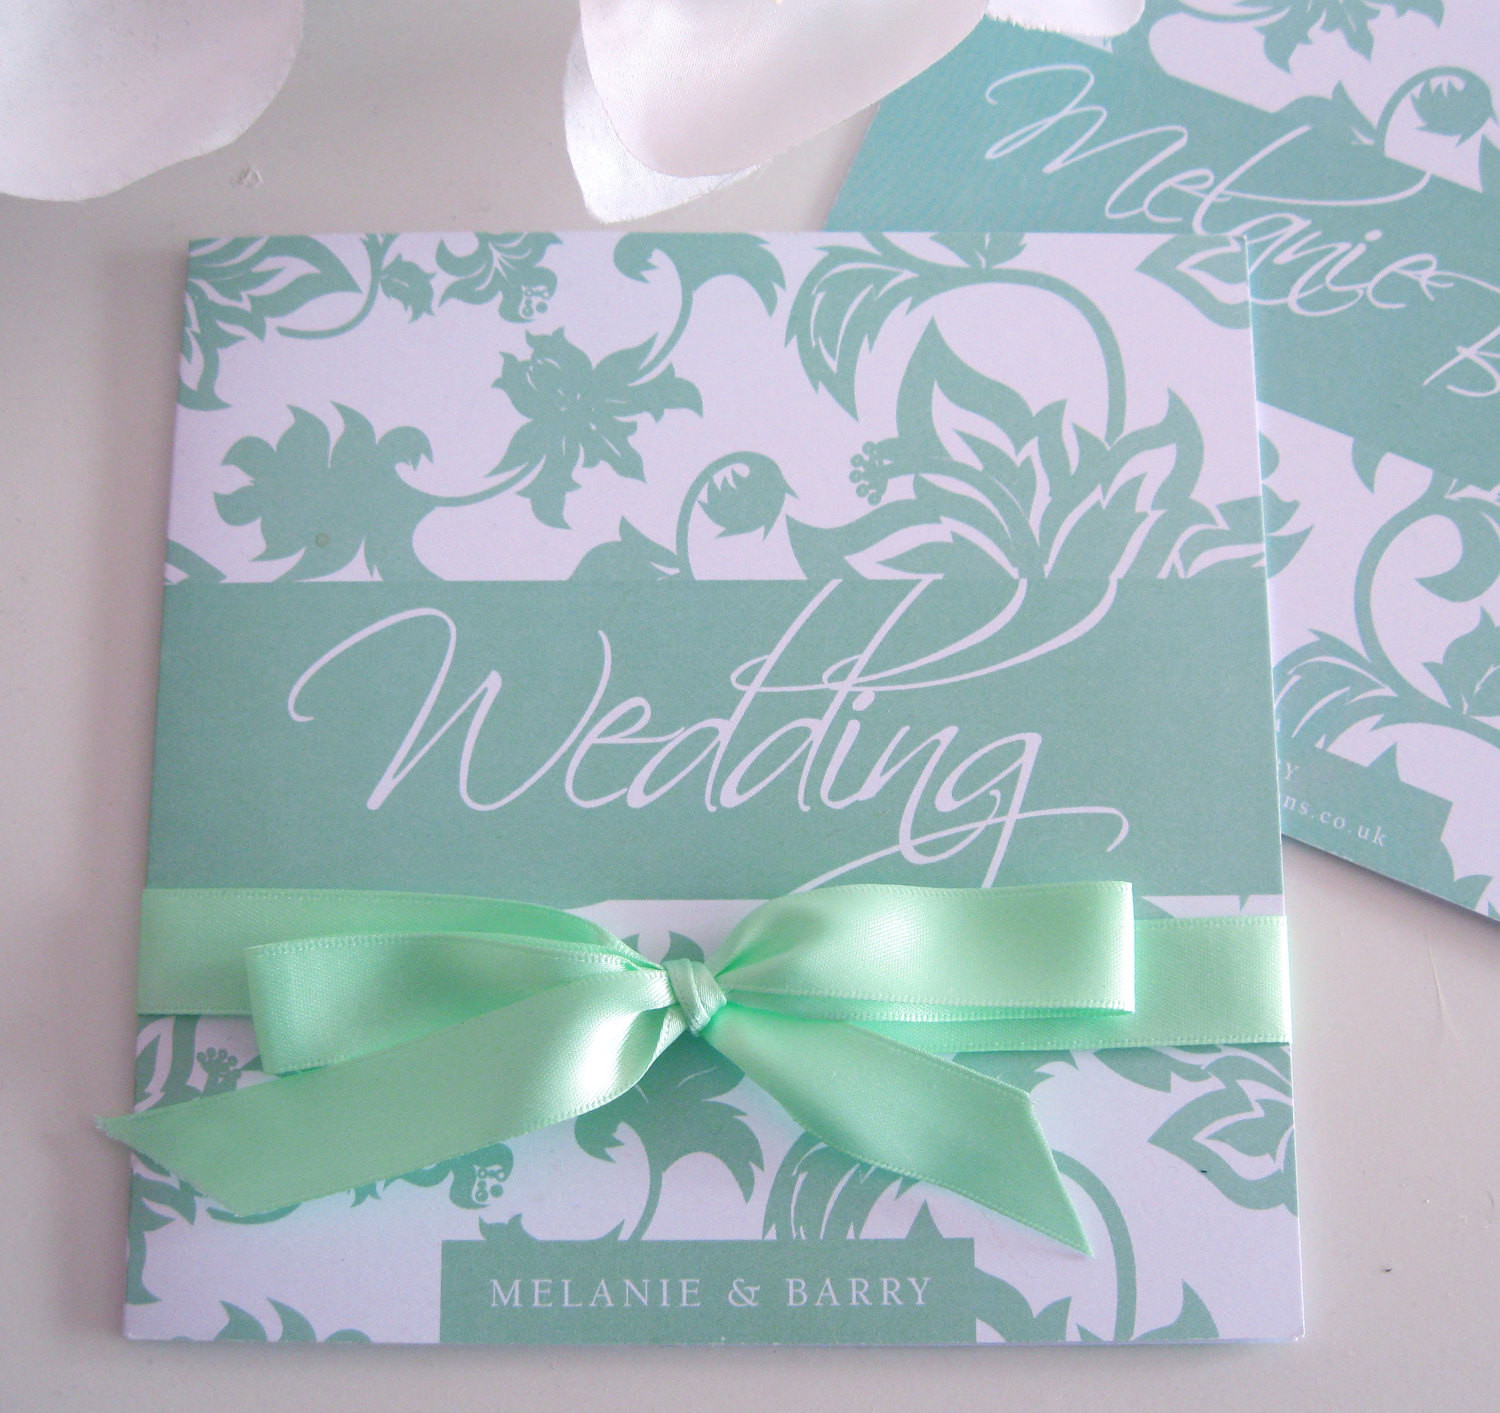 Mint Green Wedding Invitations
 So Vintage wedding invites in mint green matching save the